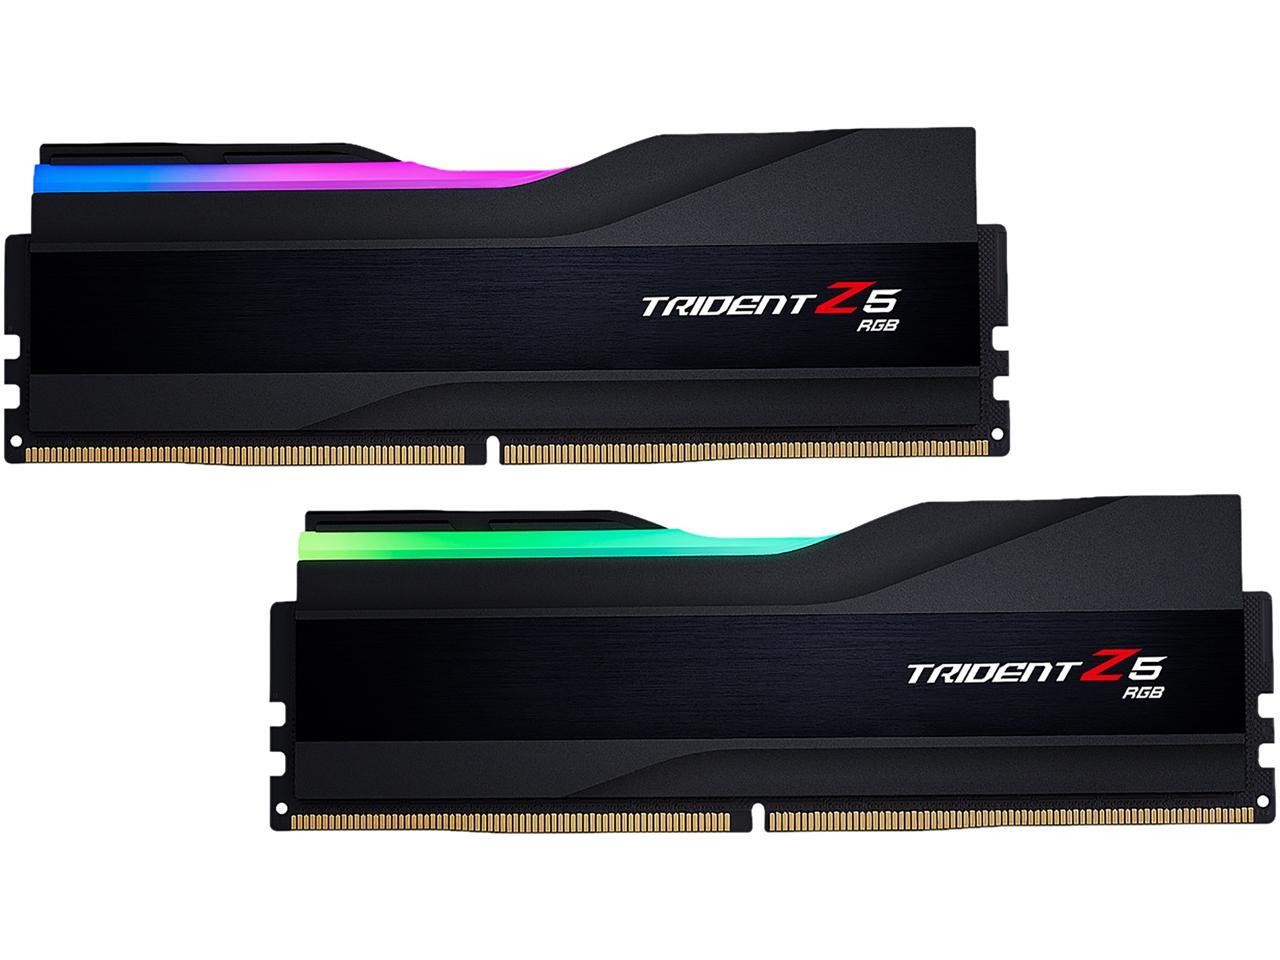 Trident Z5 RGB — Best Overall DDR5 RAM